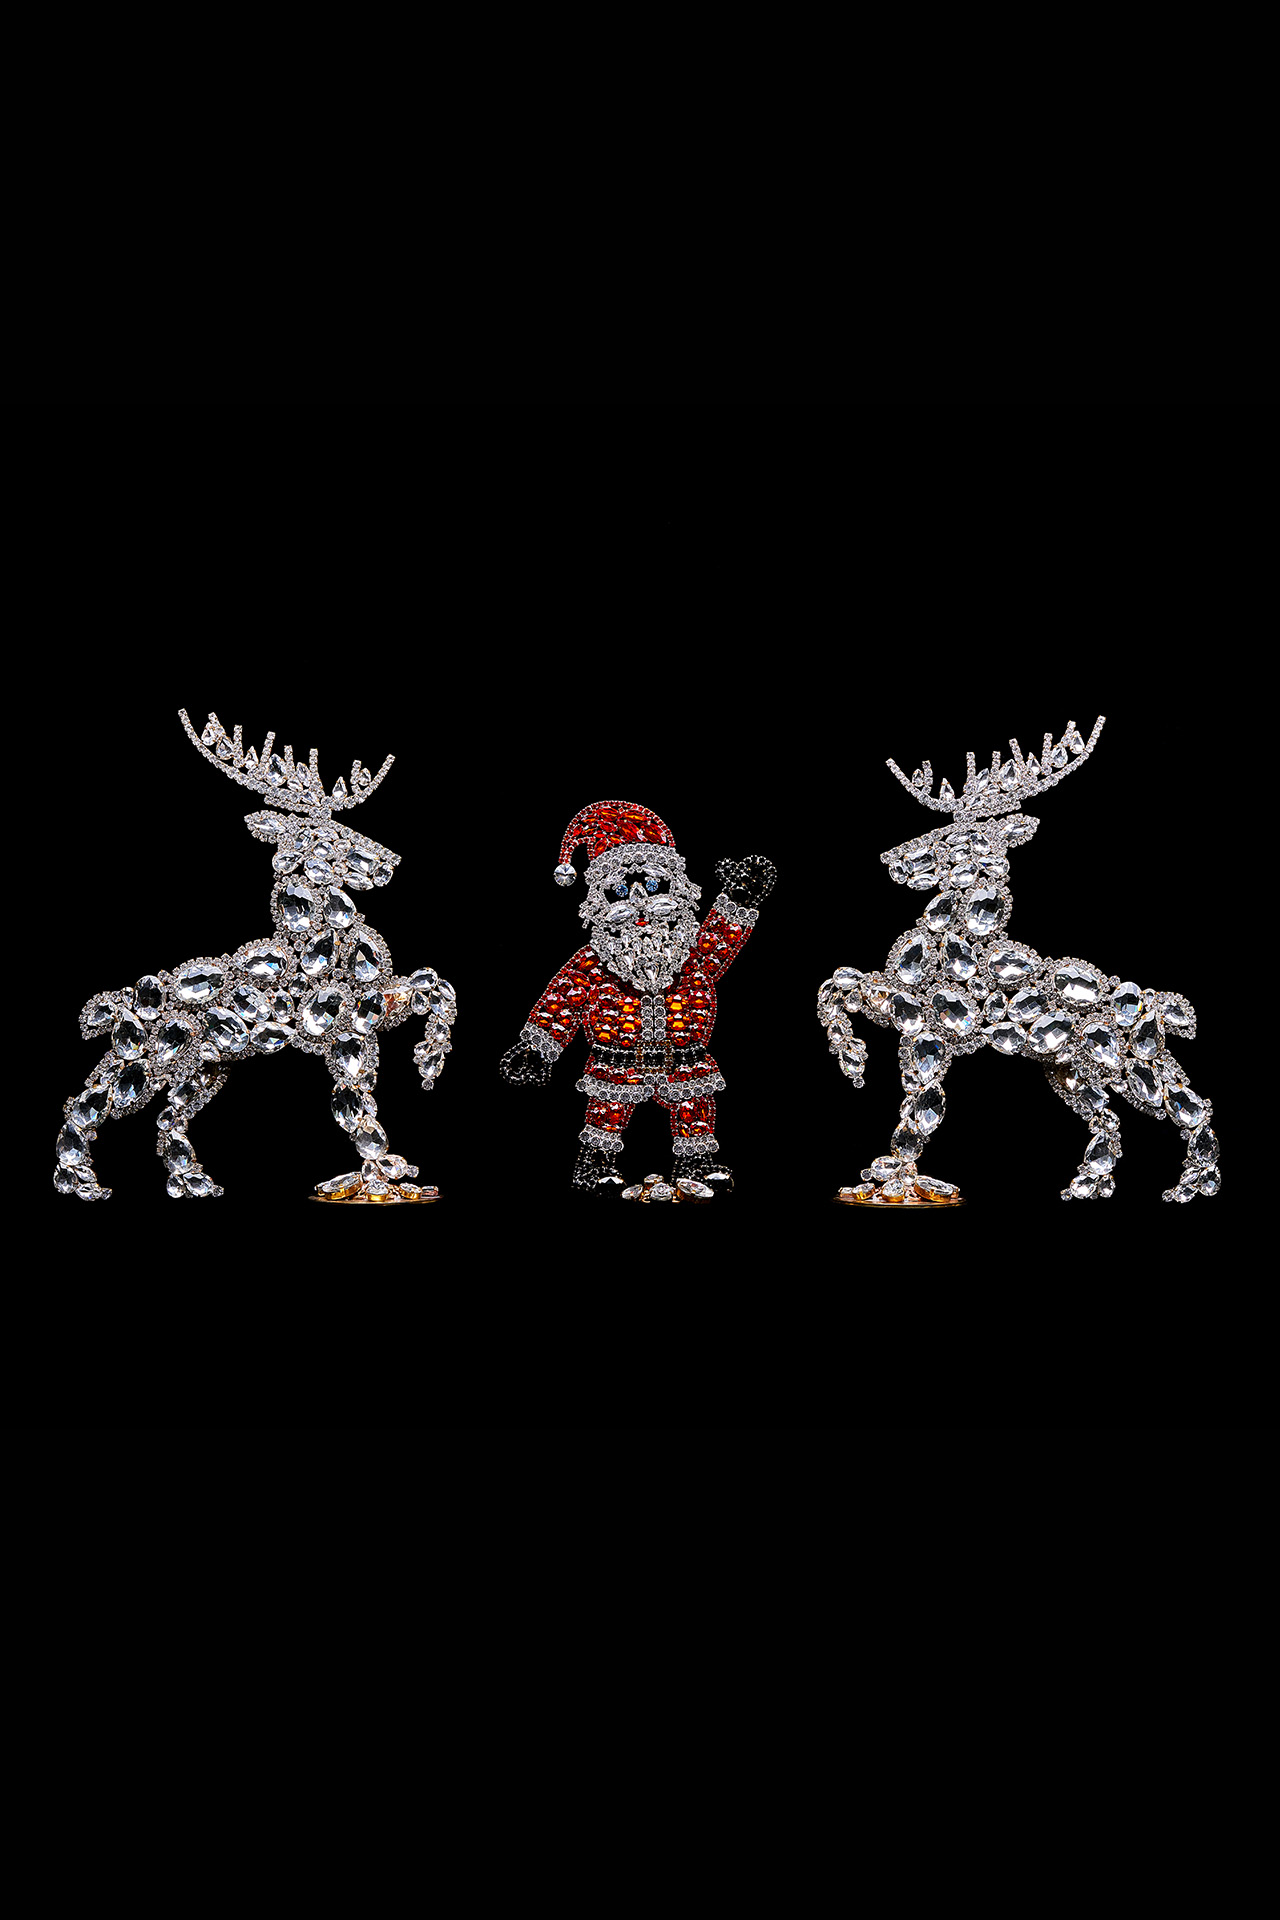 Christmas decoration of Santa Claus and set of valiant reindeers